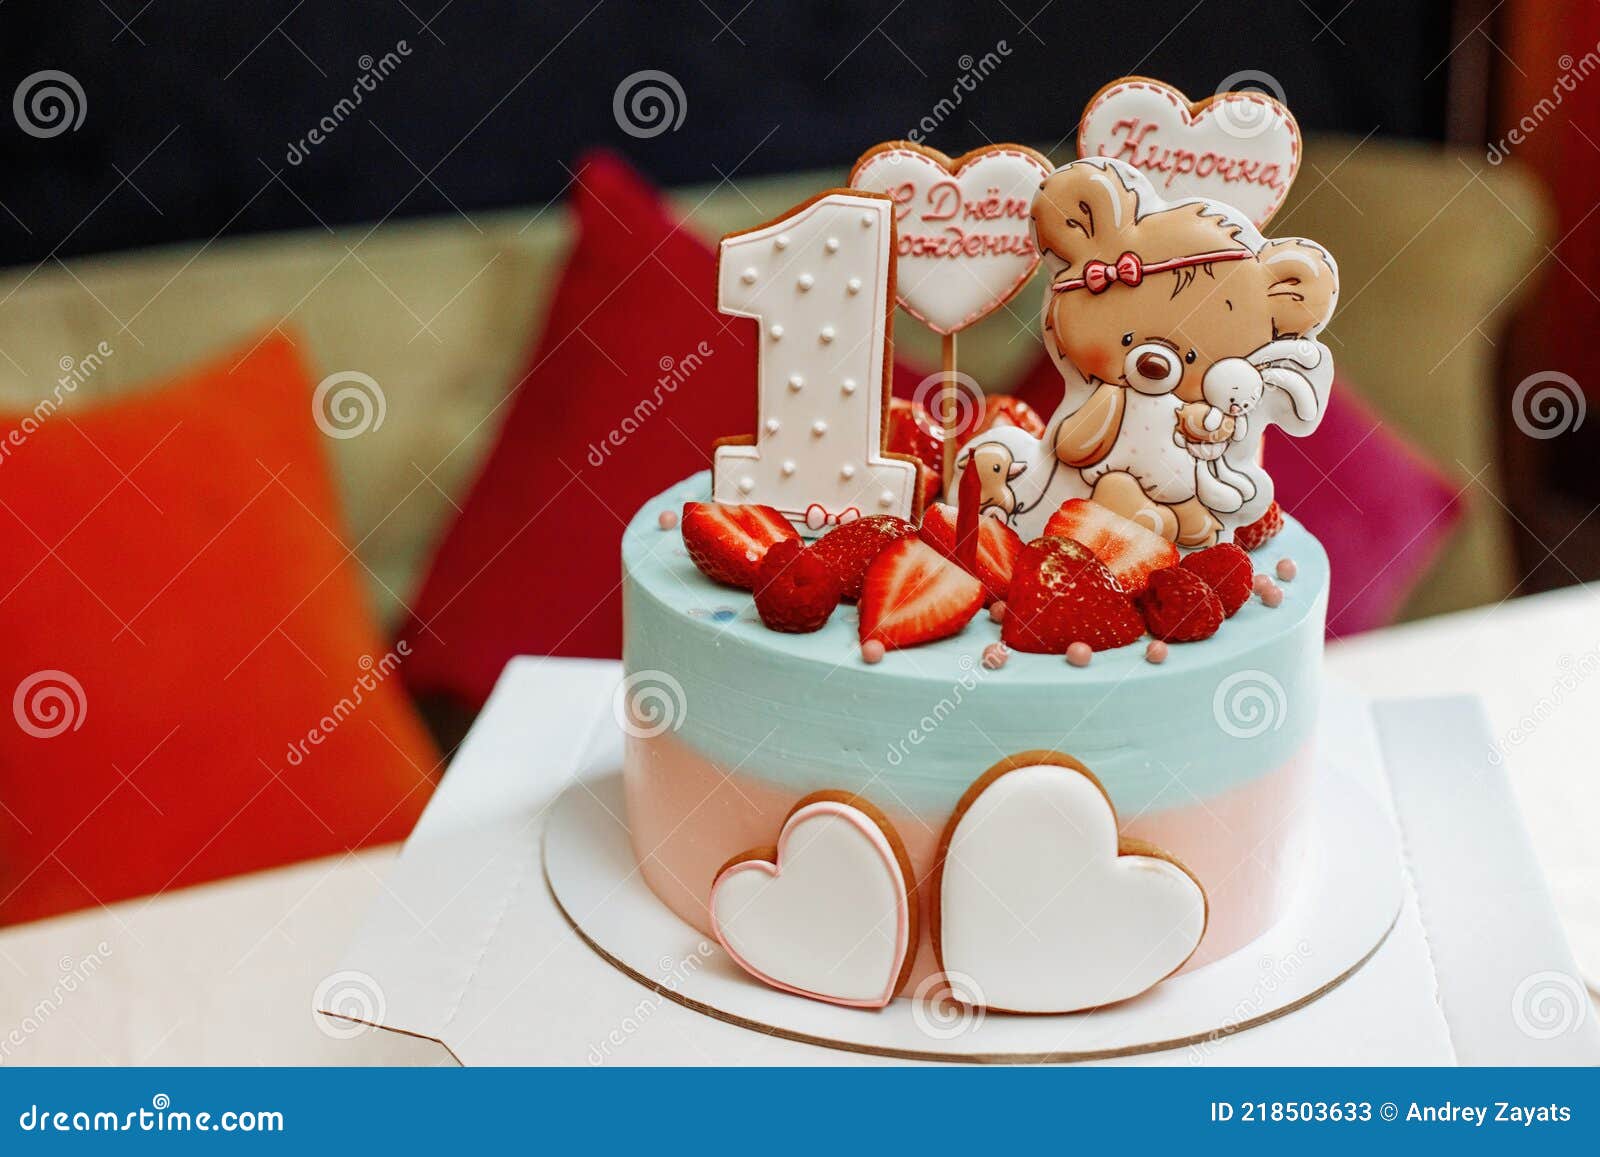 A Beautiful Birthday Cake for a Children S Birthday. Gift for a ...